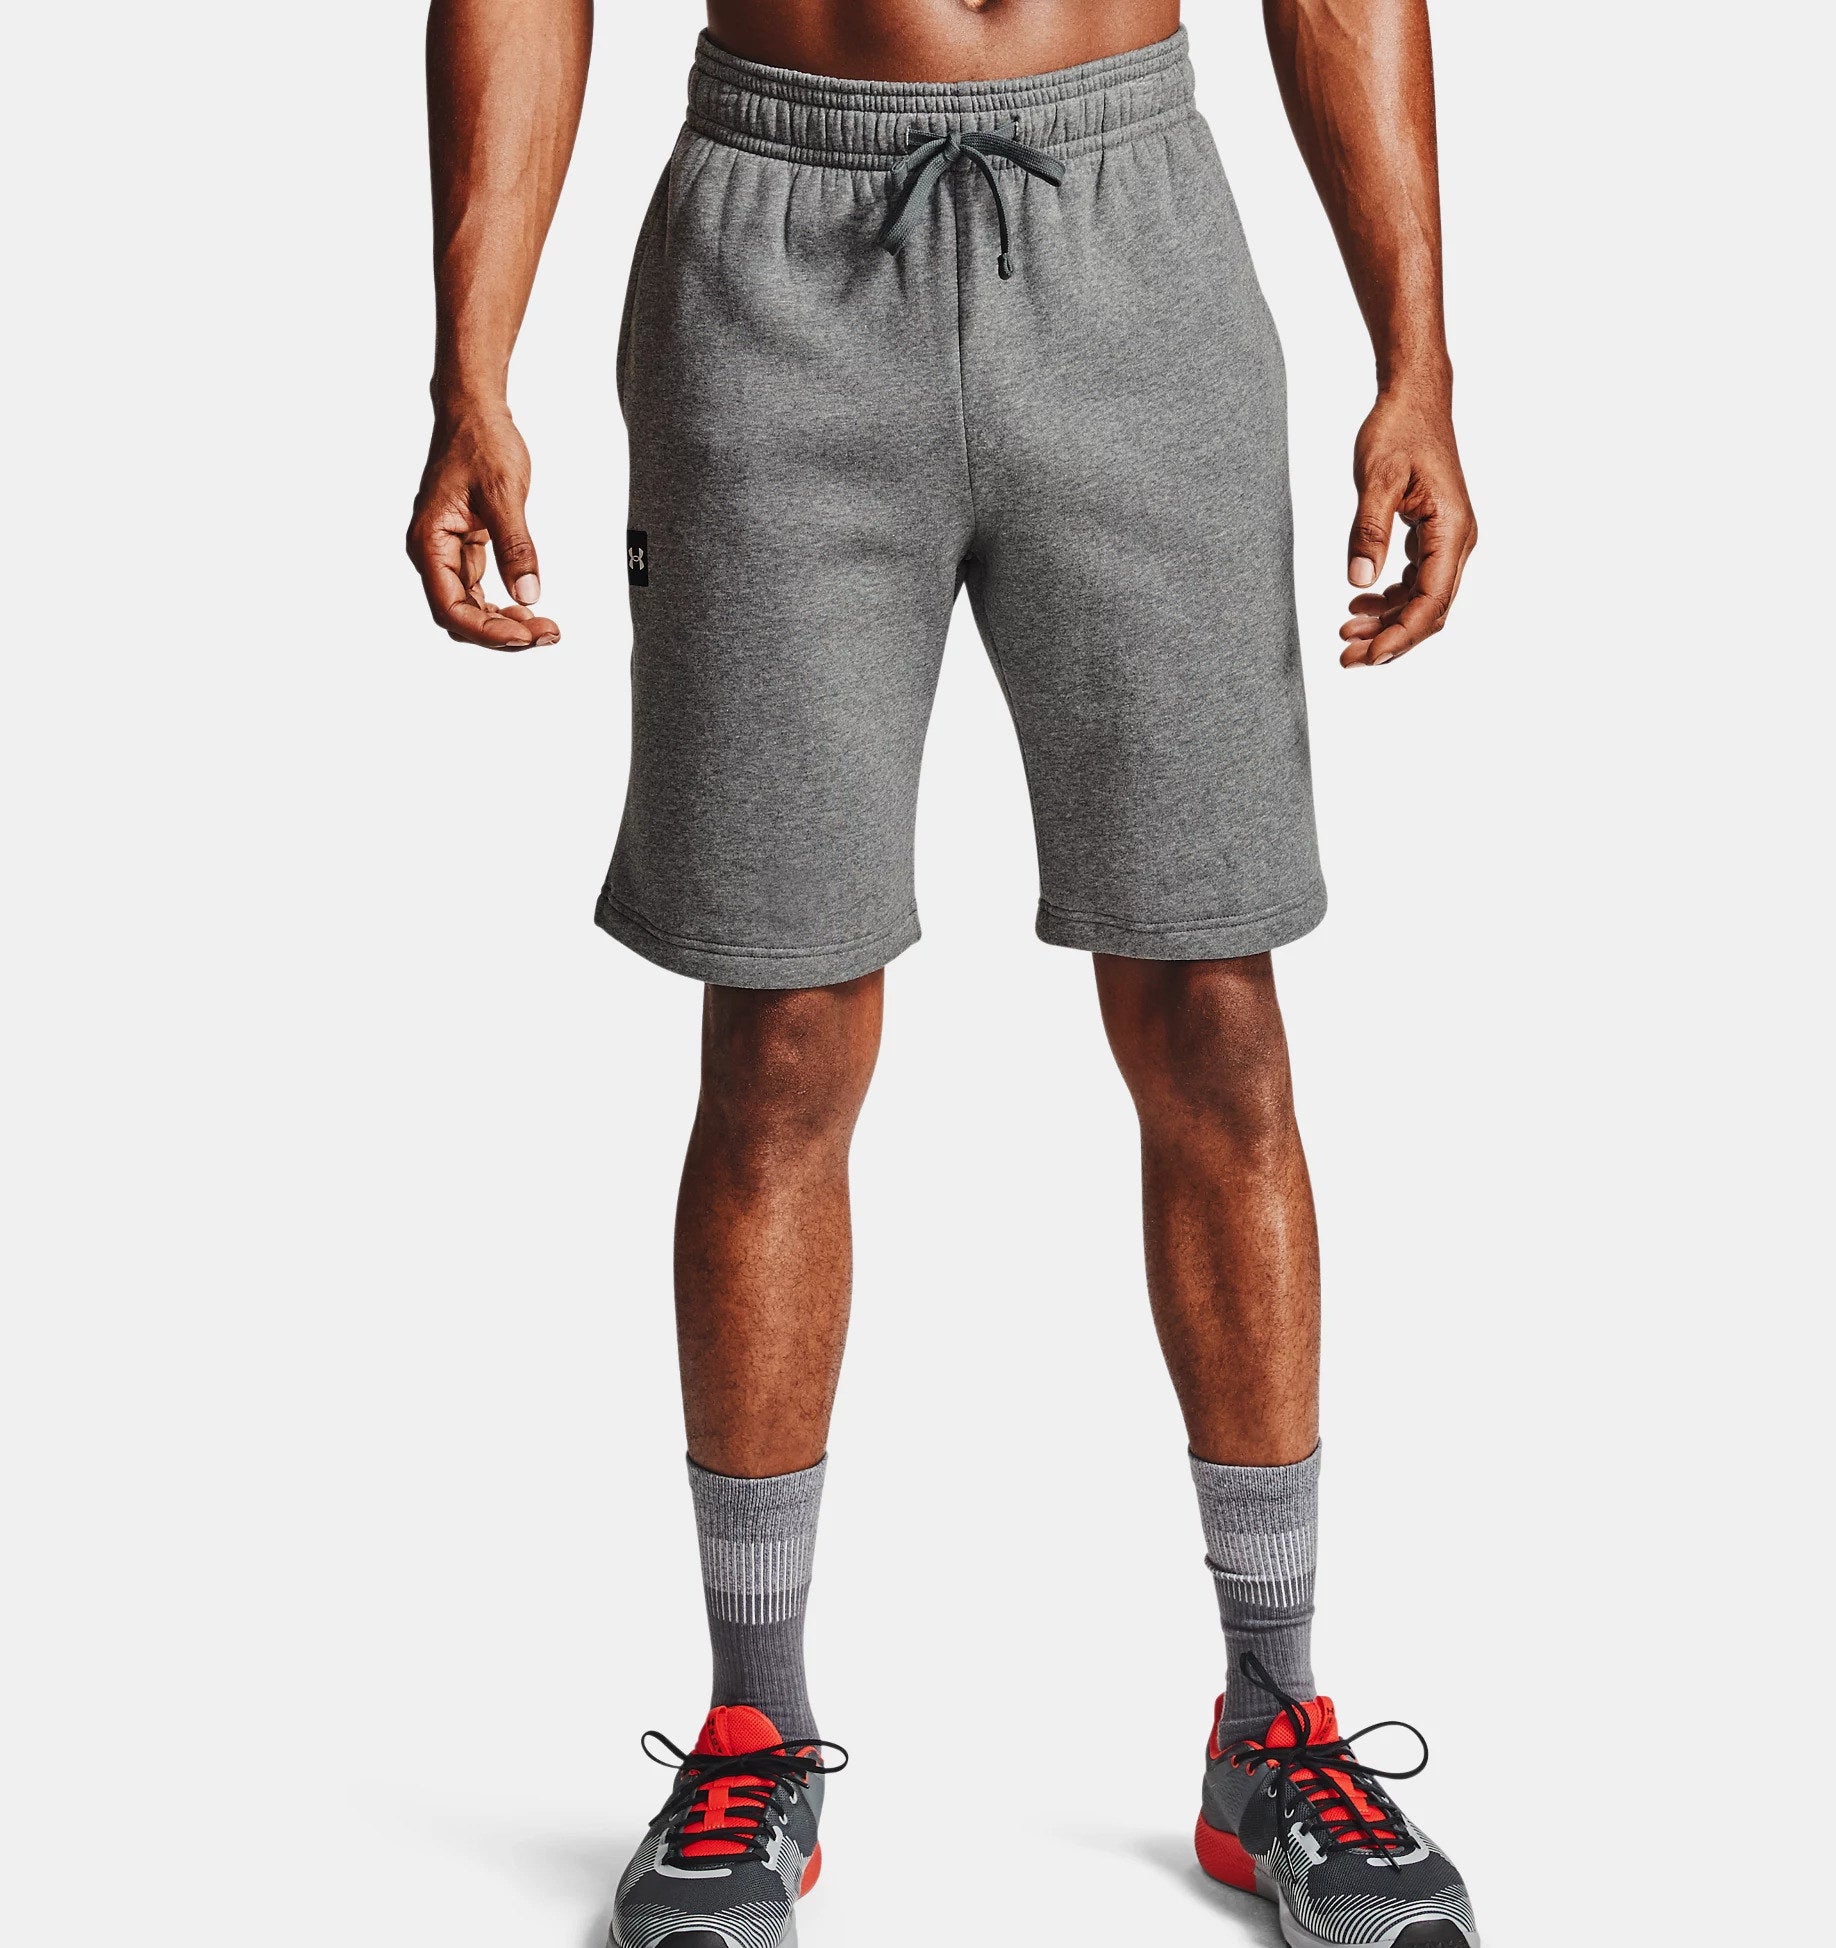 model in gray fleece workout shorts, gray socks, and gray athletic sneakers